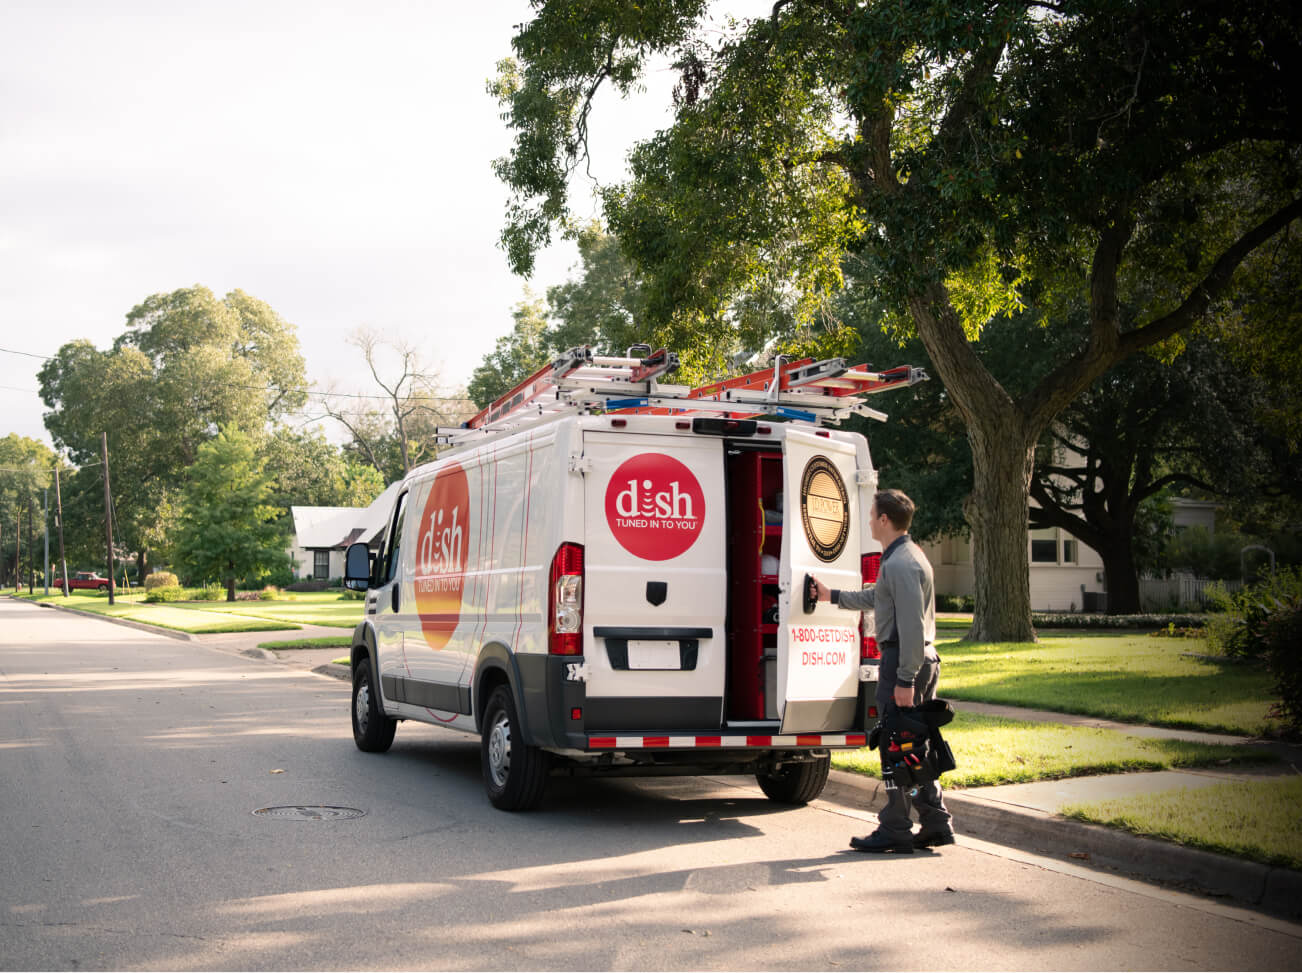 DISH Installation technician getting out of DISH van with provided tools working job hiring near you